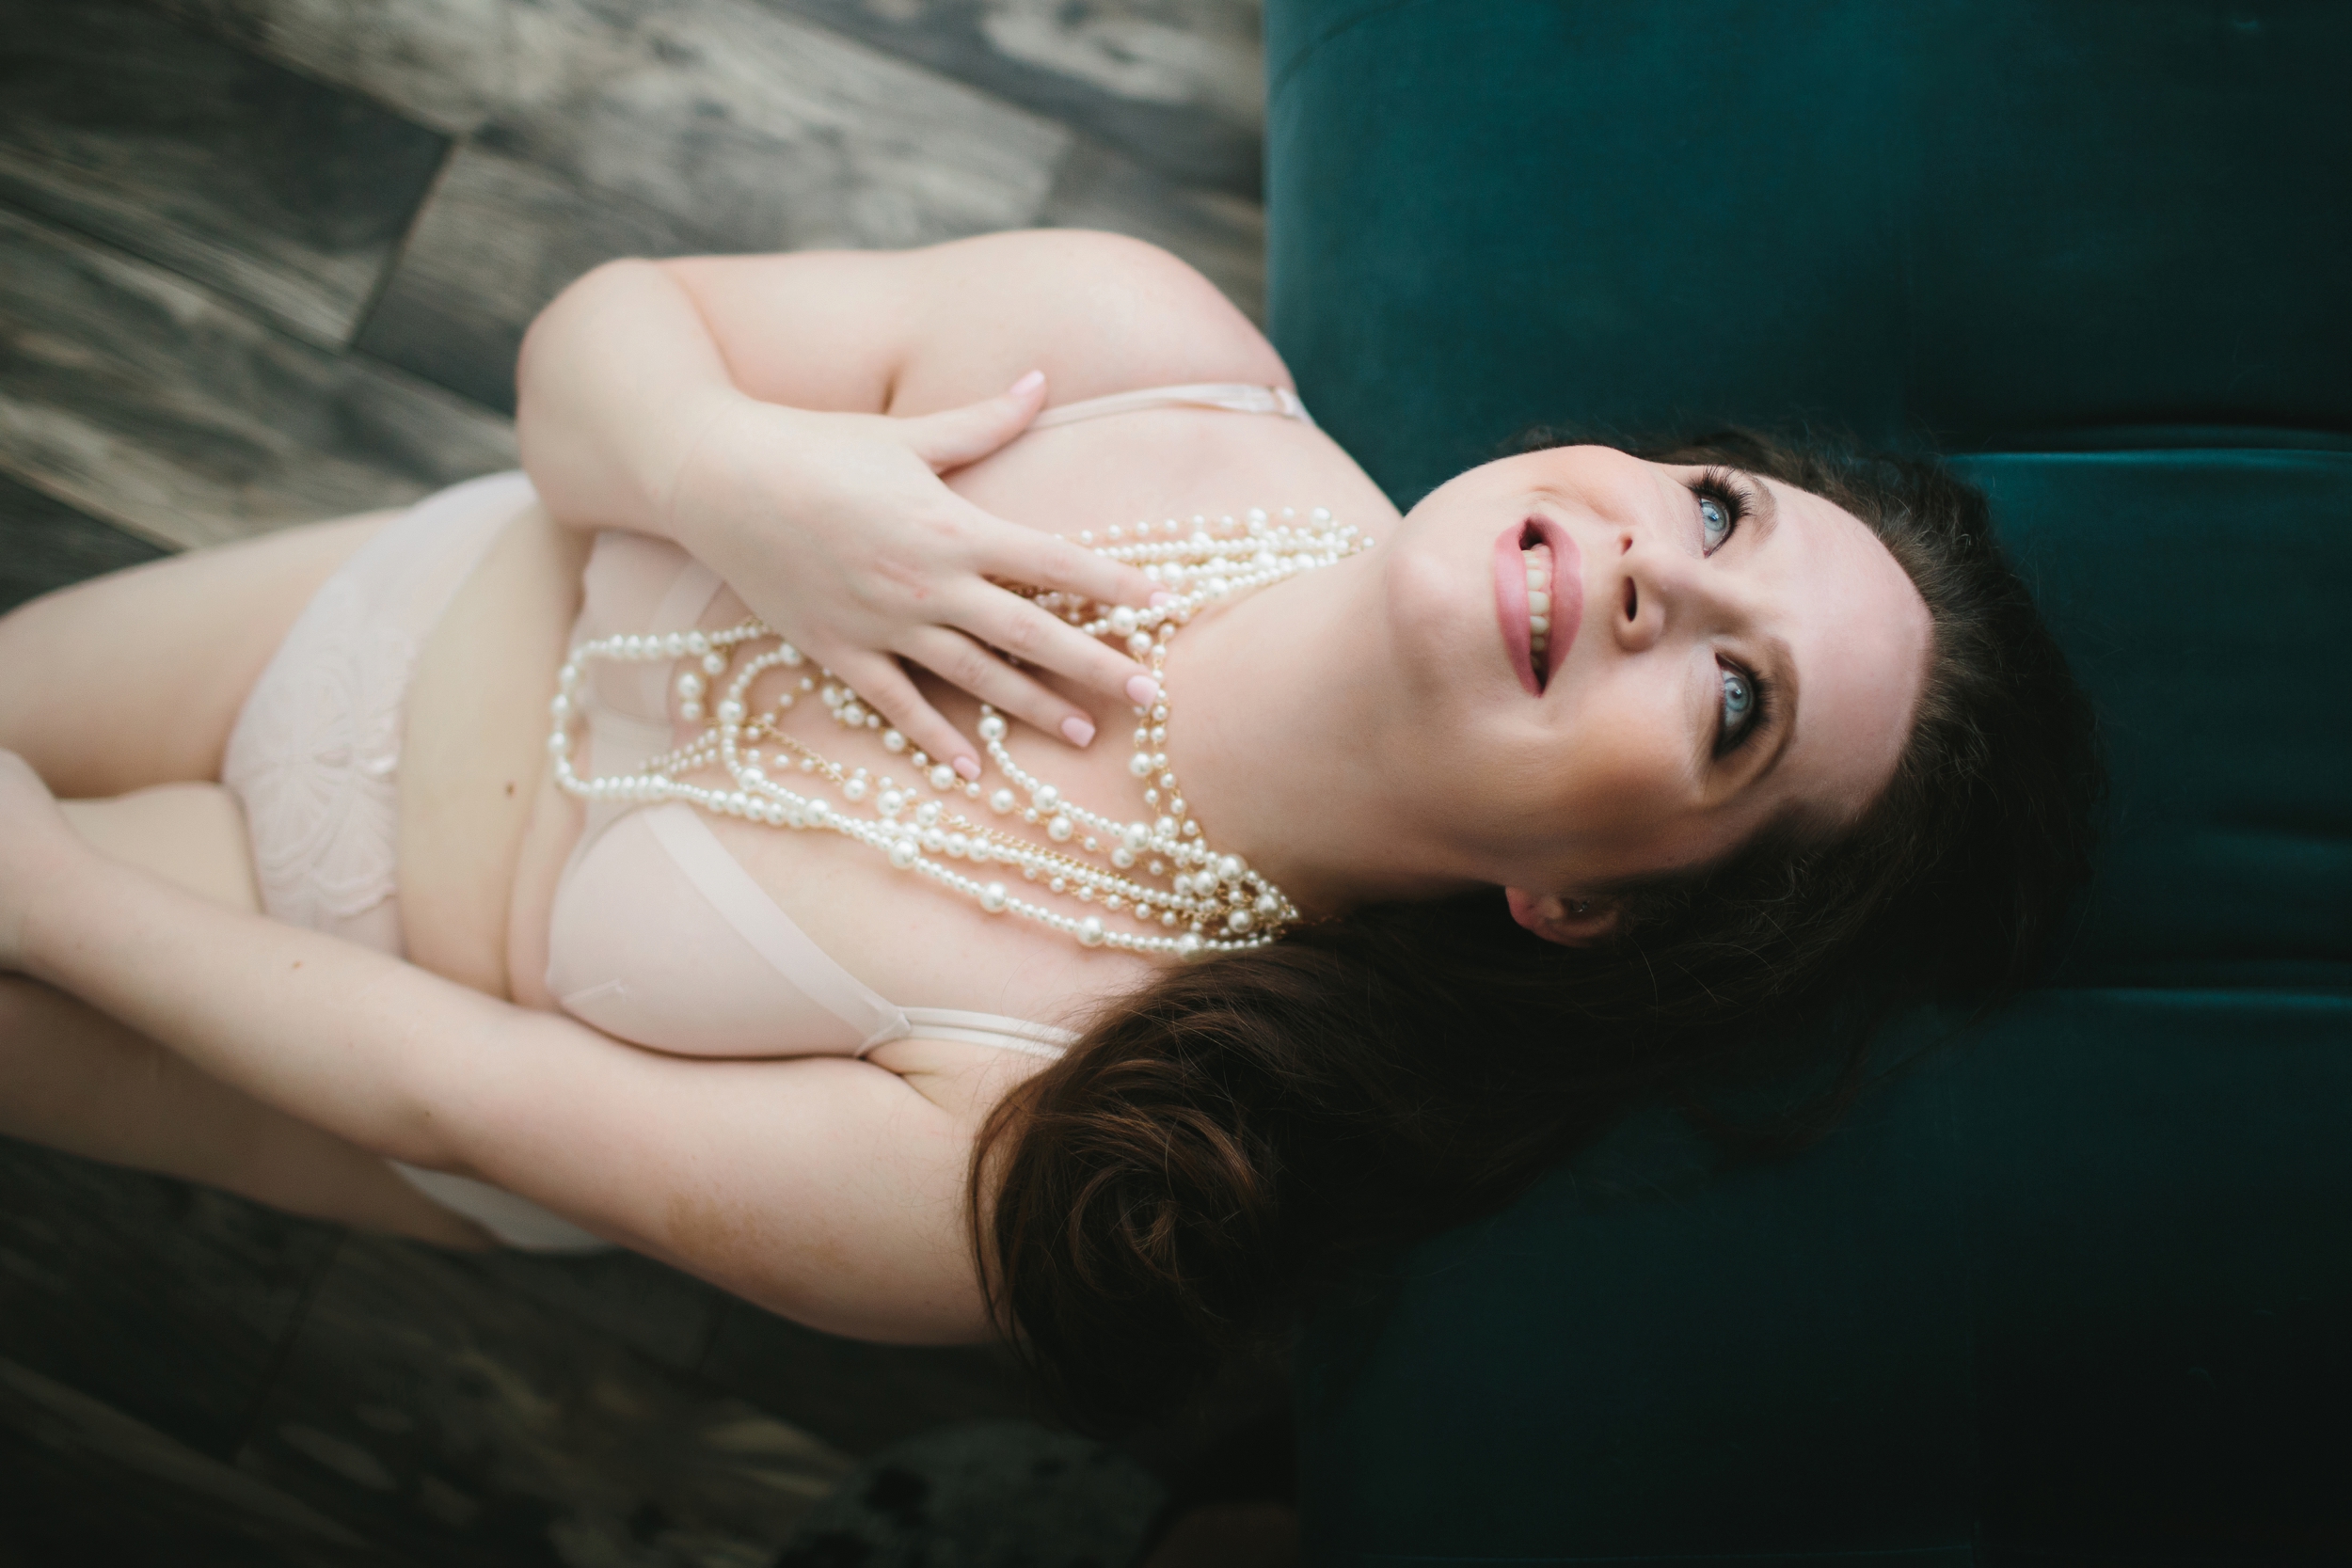 Brunette Woman in cream lingerie and pearls, Boudoir Photography by Lindsay Hite